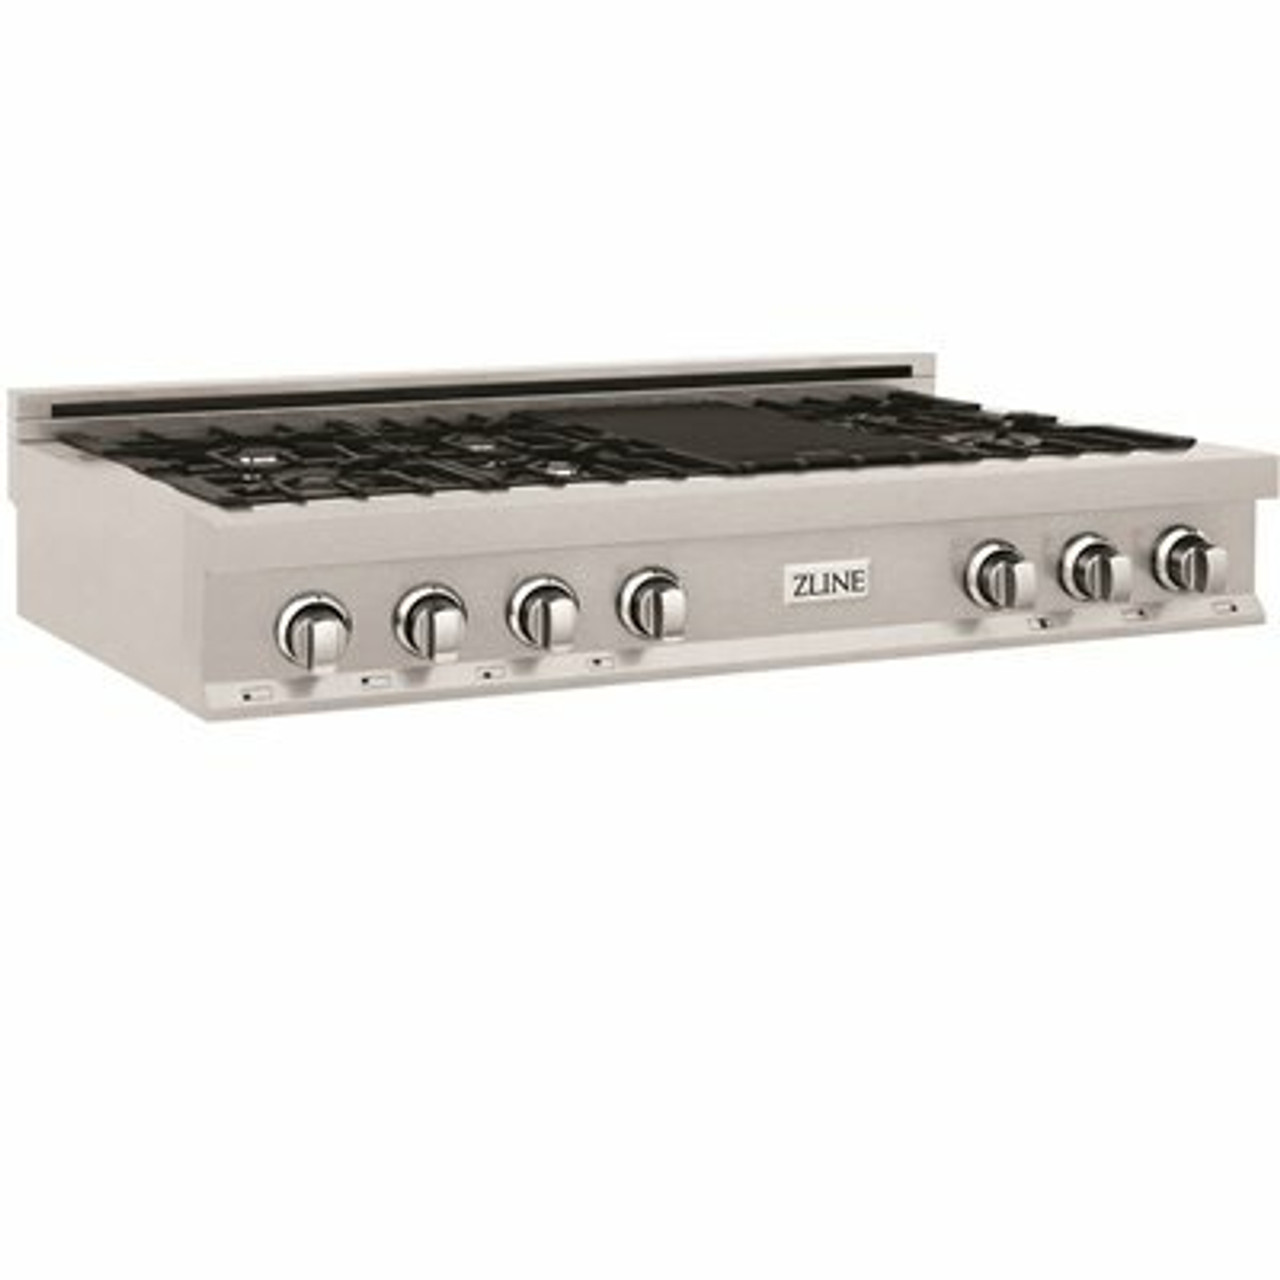 Zline 48 In. Porcelain Gas Stovetop In Durasnow Stainless Steel With 7 Gas Burners And Griddle (Rts-48)